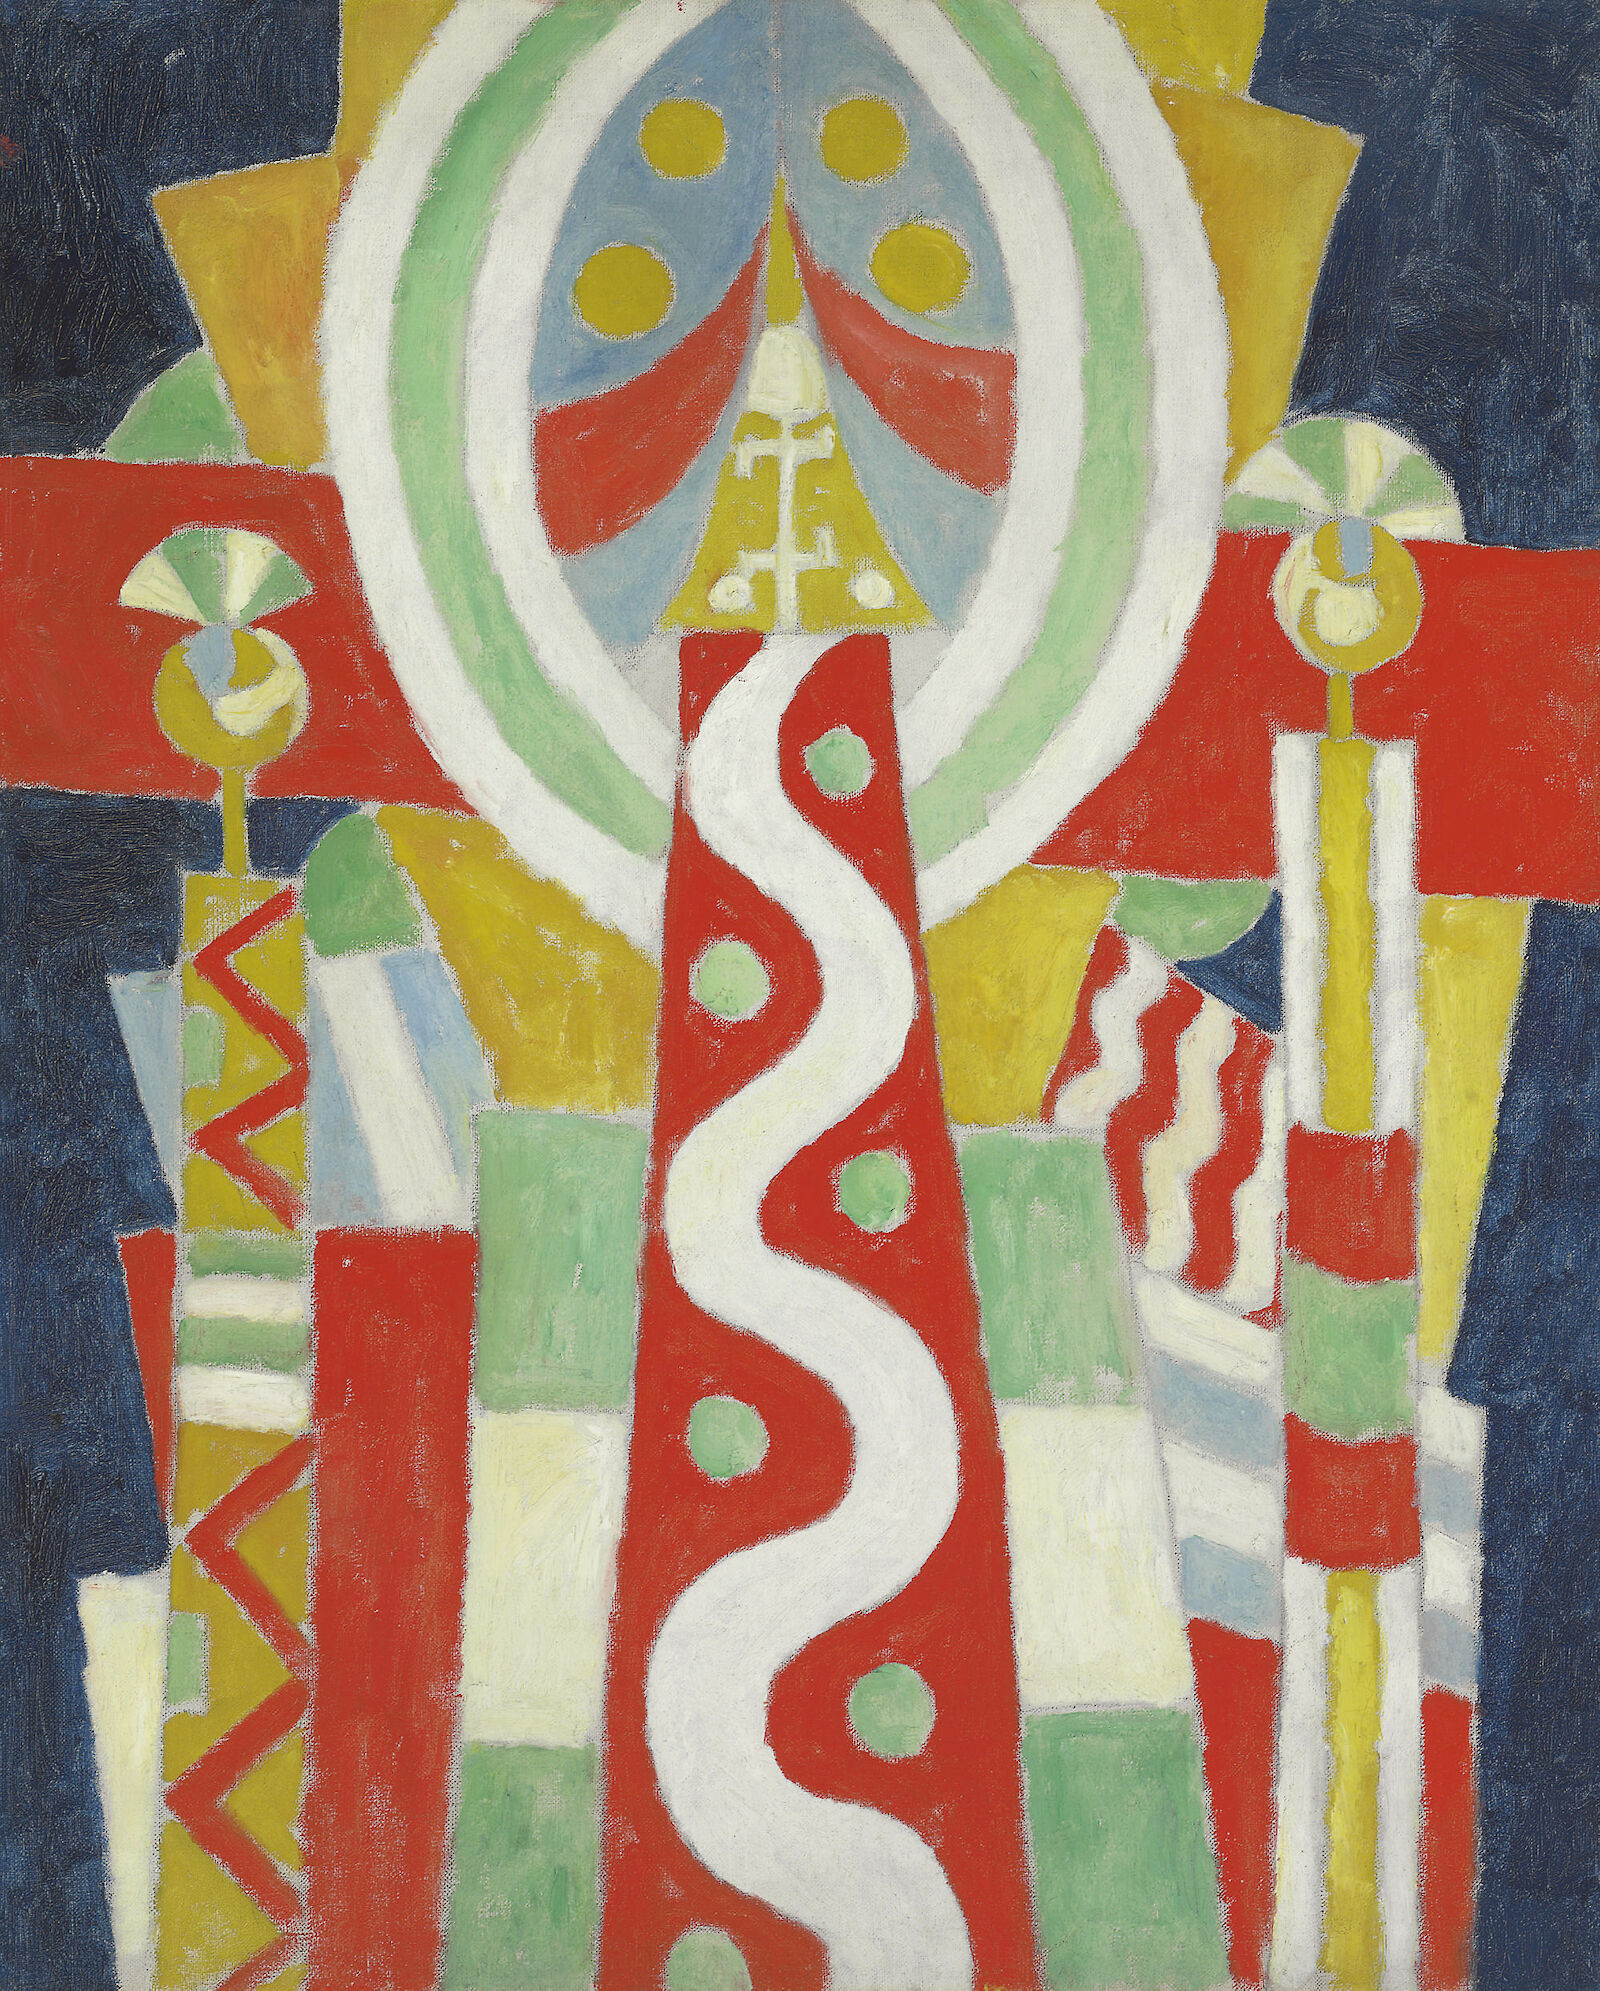 Lighthouse by Marsden Hartley - 1915 - 101.6 x 81.3 cm private collection